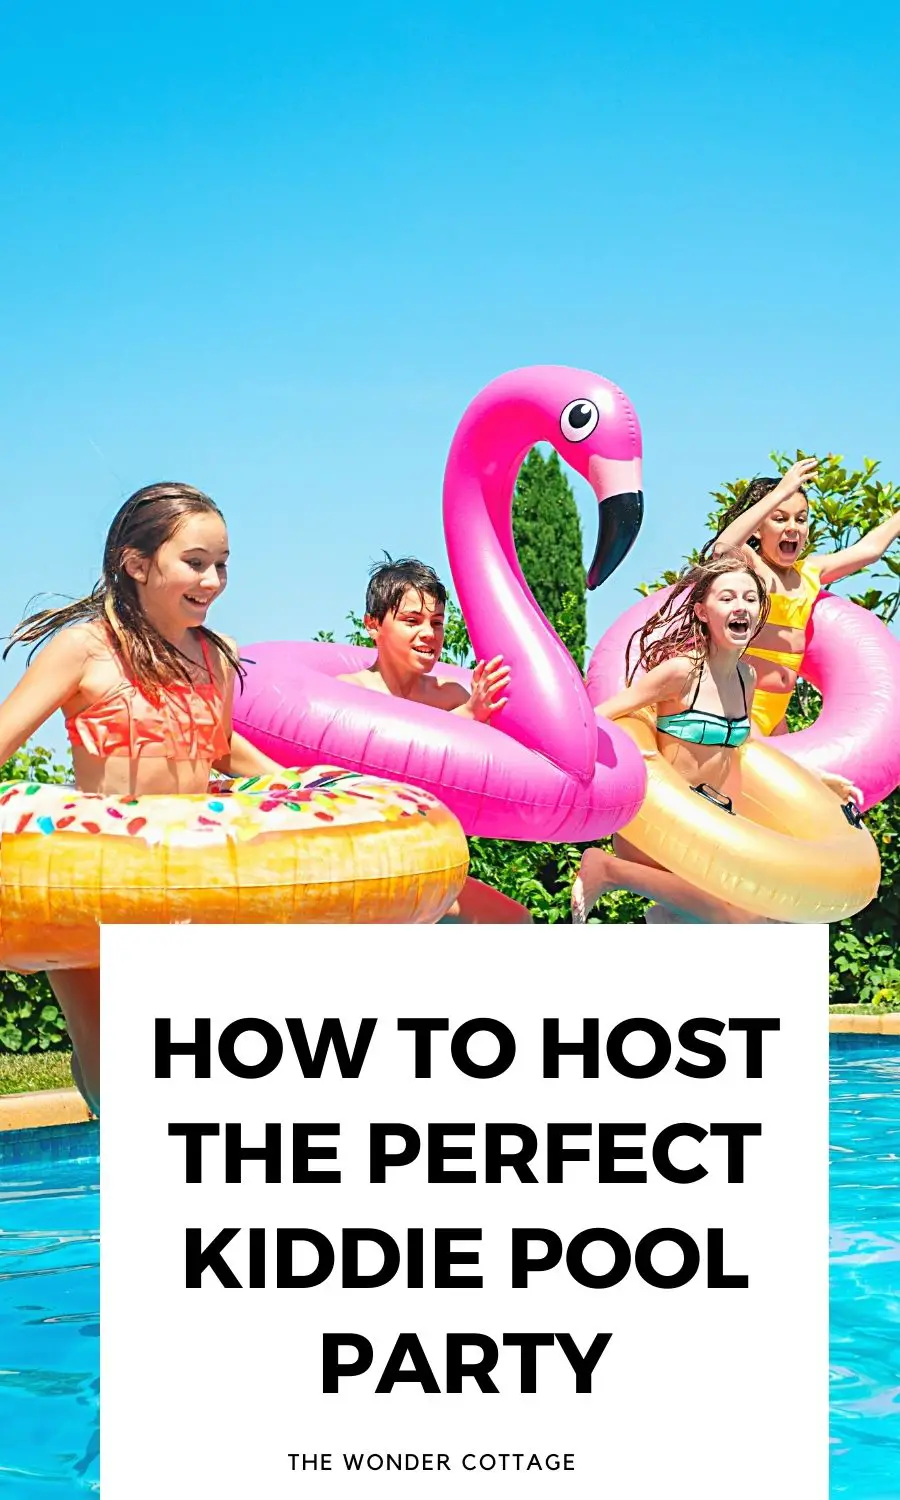 How To Host The Perfect Kiddie Pool Party